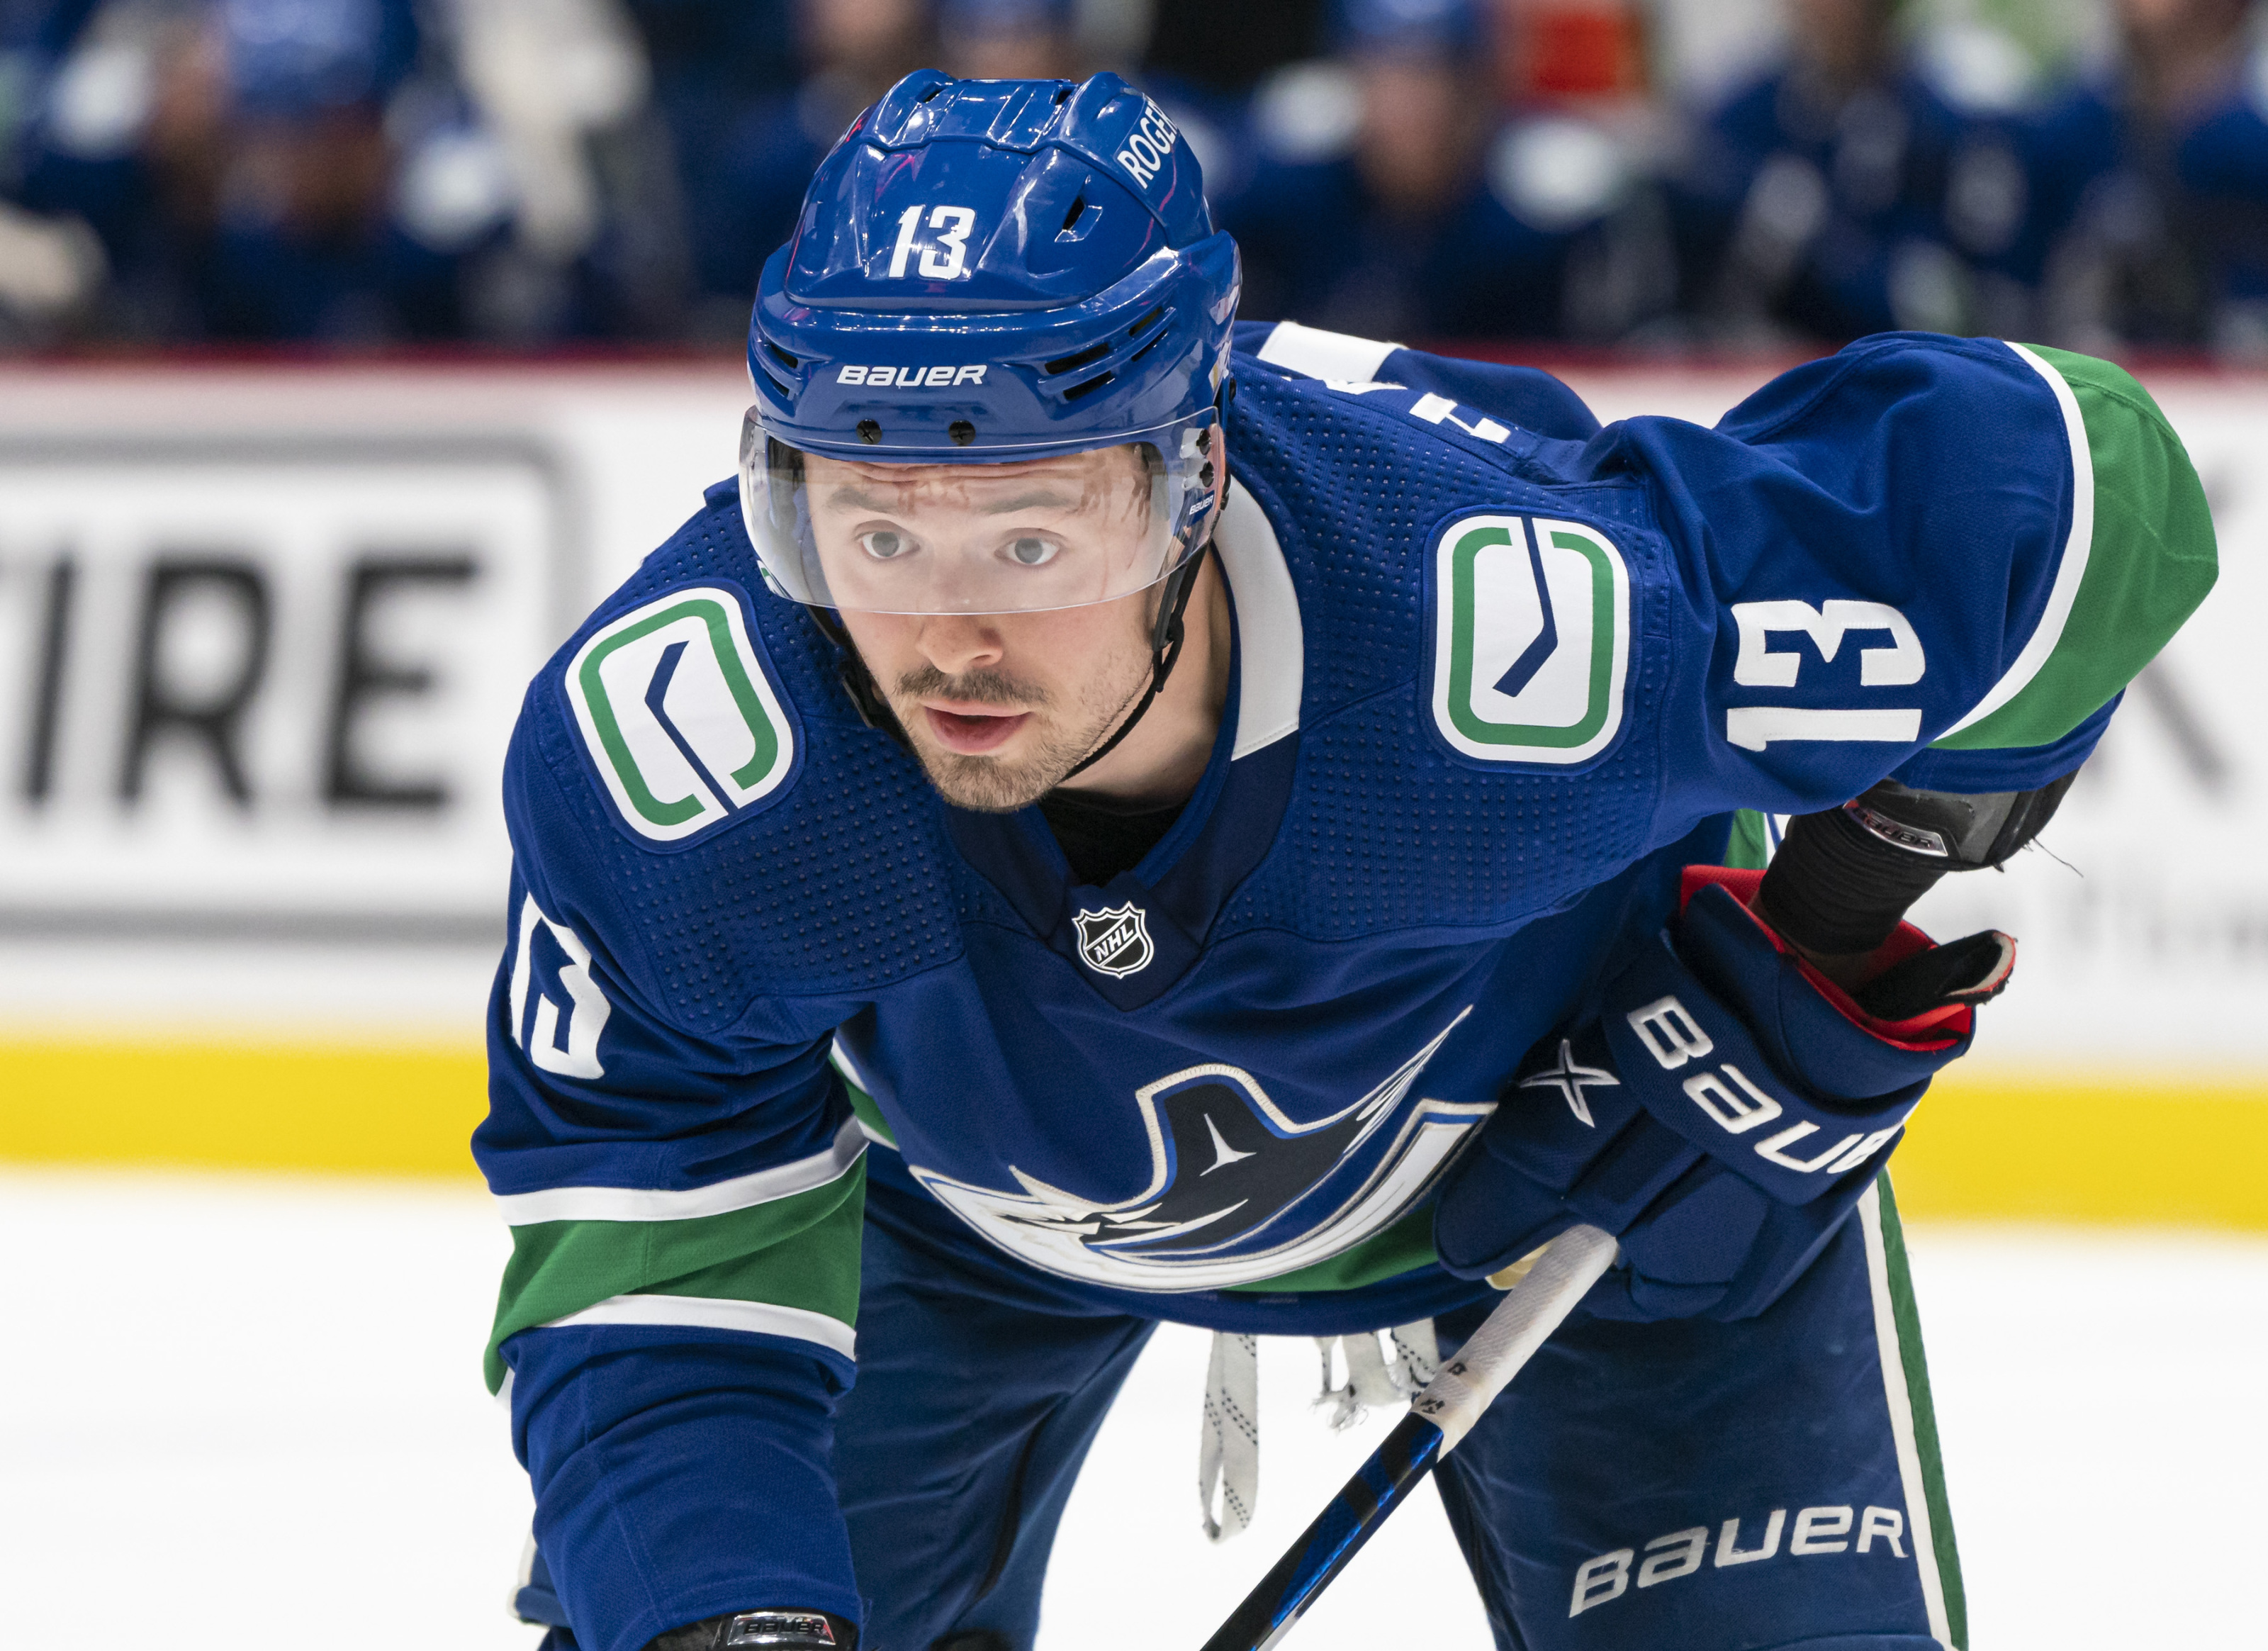 Ex-Canucks winger Zack MacEwen available for free on waivers